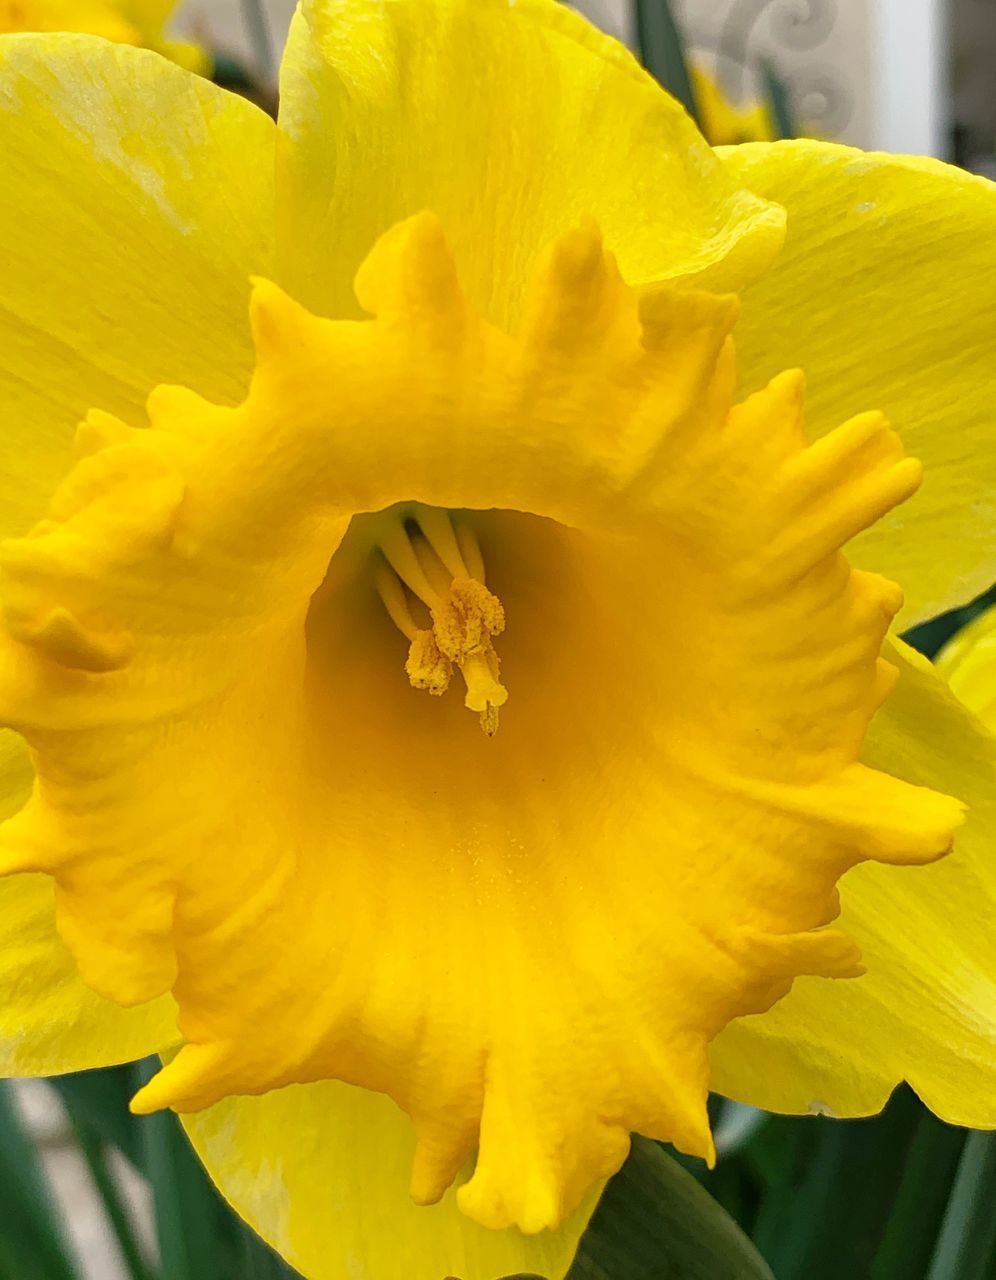 EXTREME CLOSE-UP OF YELLOW DAFFODIL FLOWER